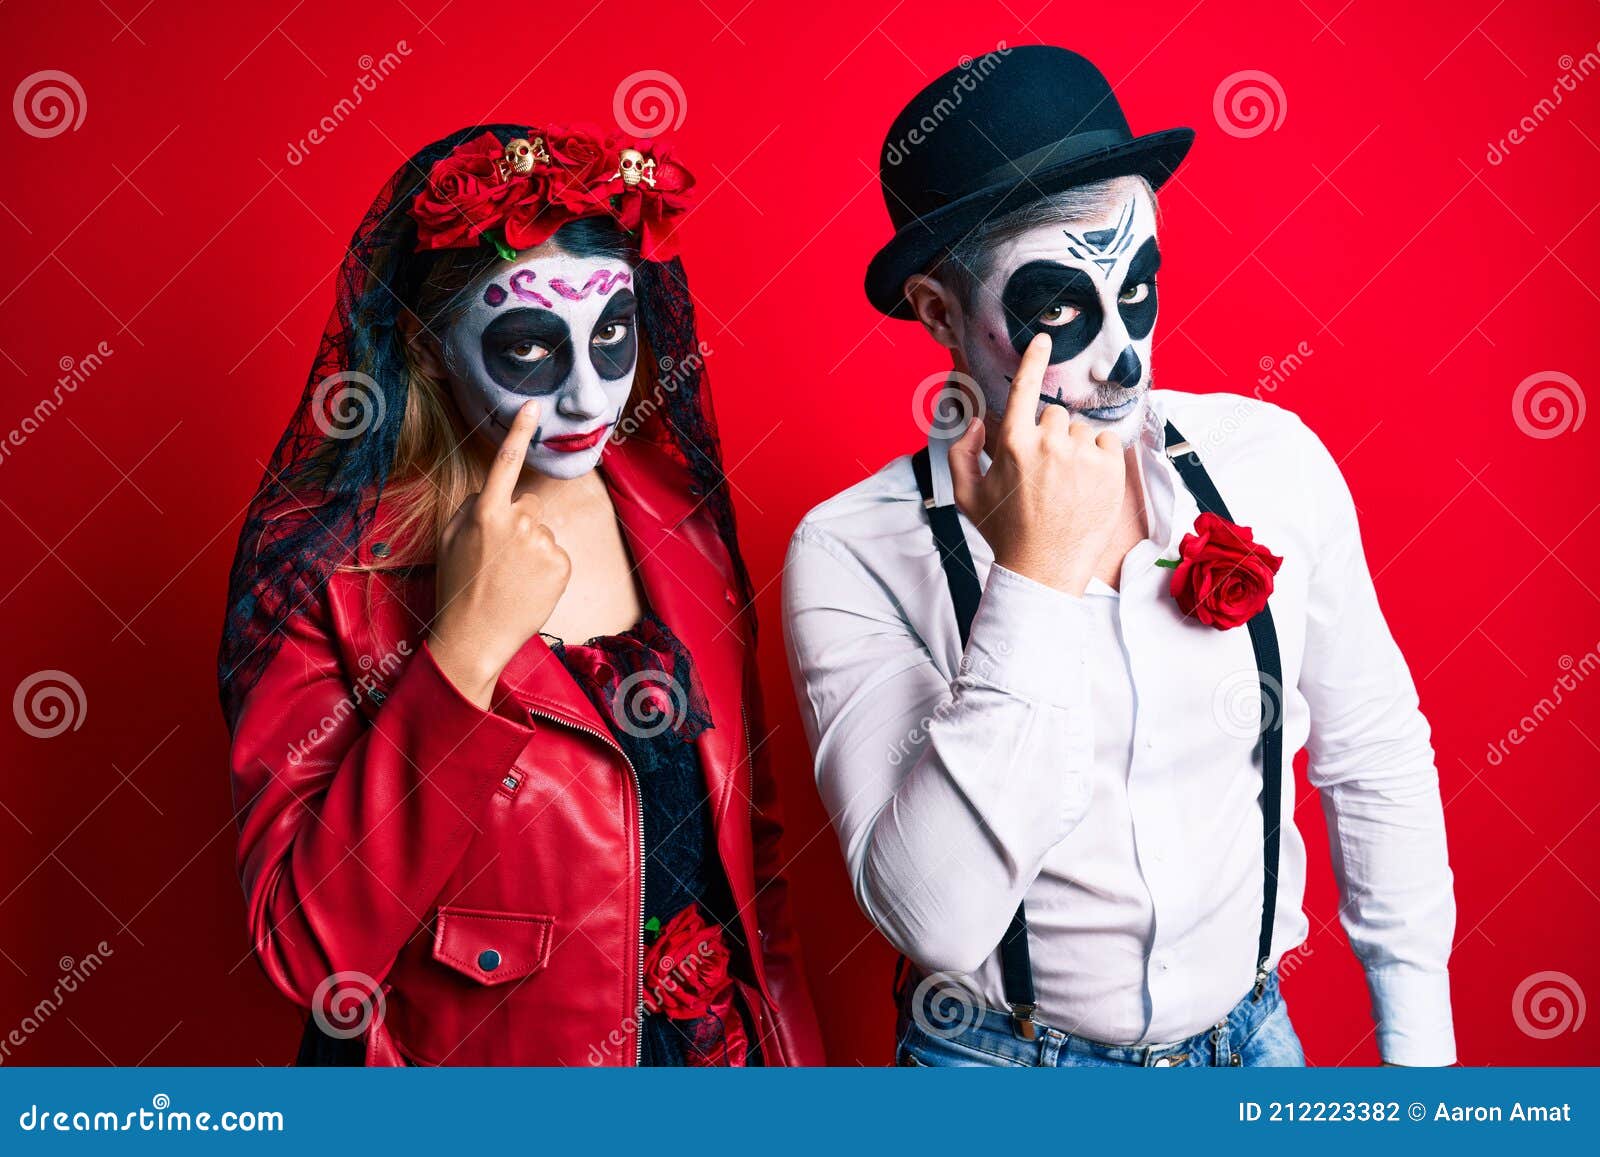 Couple Wearing Day of the Dead Costume Over Red Pointing To the Eye ...